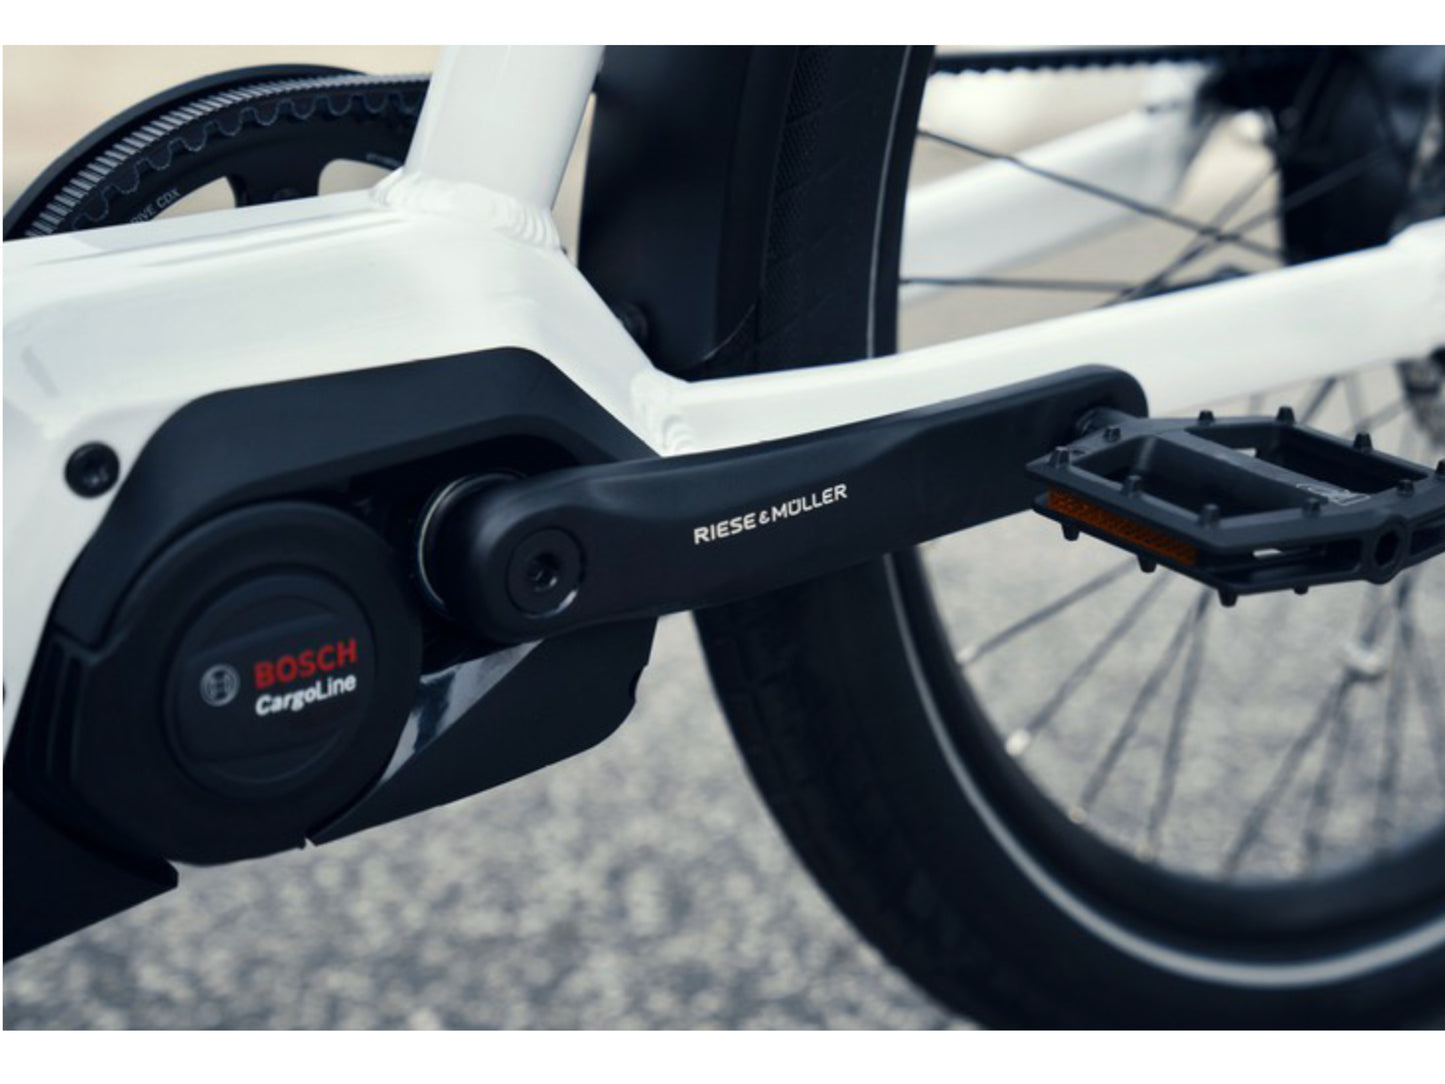 Riese & Muller Packster 70 Automatic cargo eMTB hardtail close up bosch motor crankset pedal